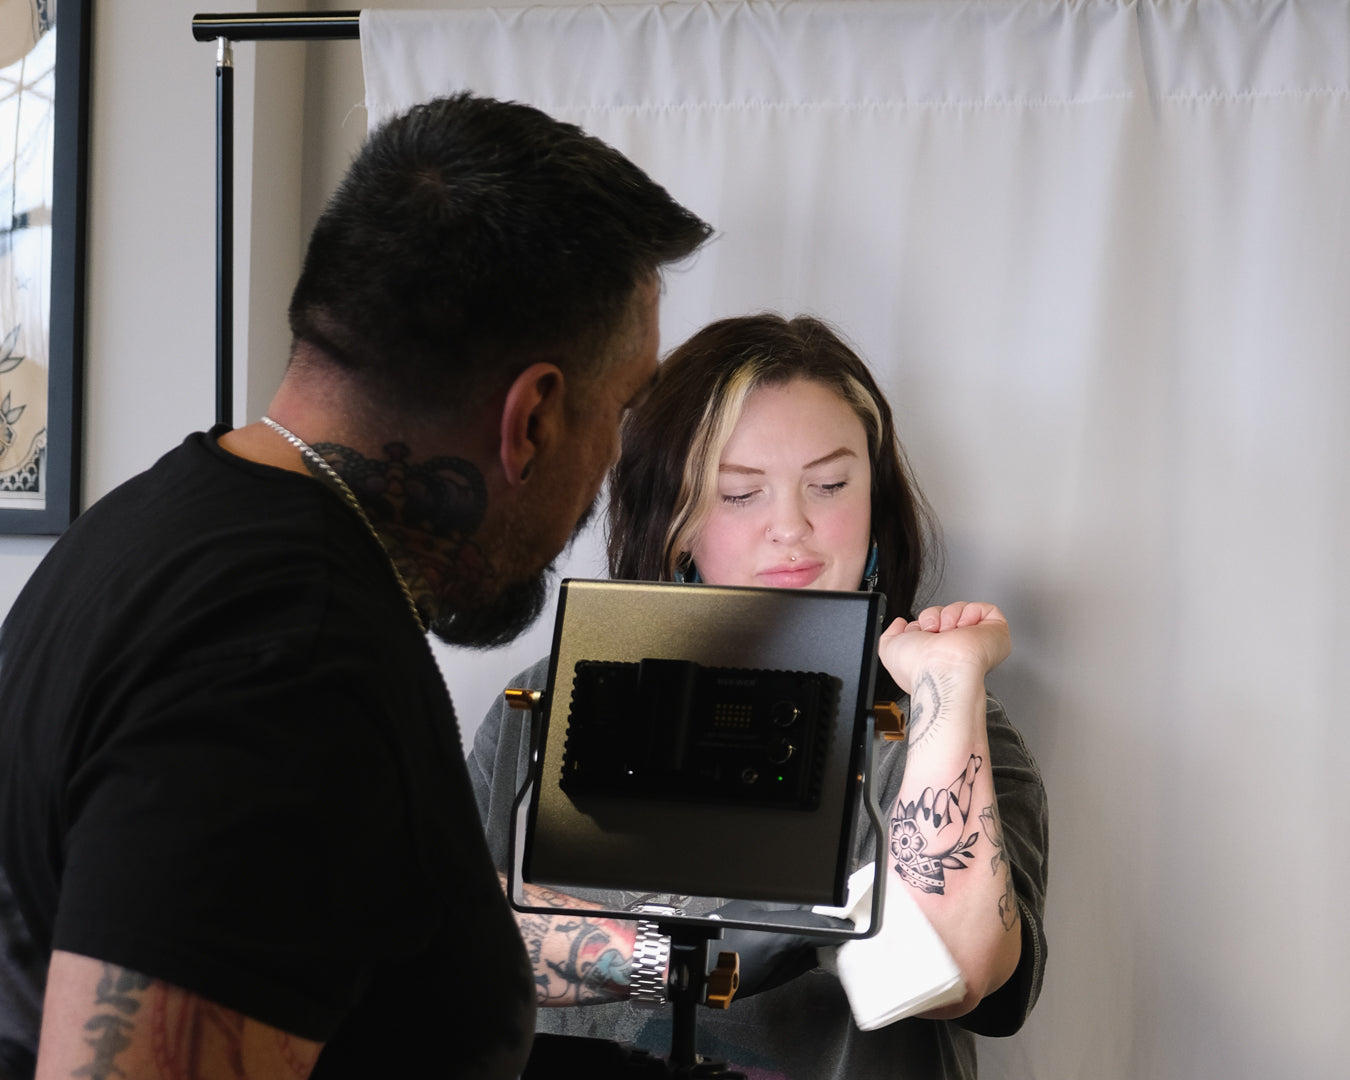 How to Care for a New Tattoo